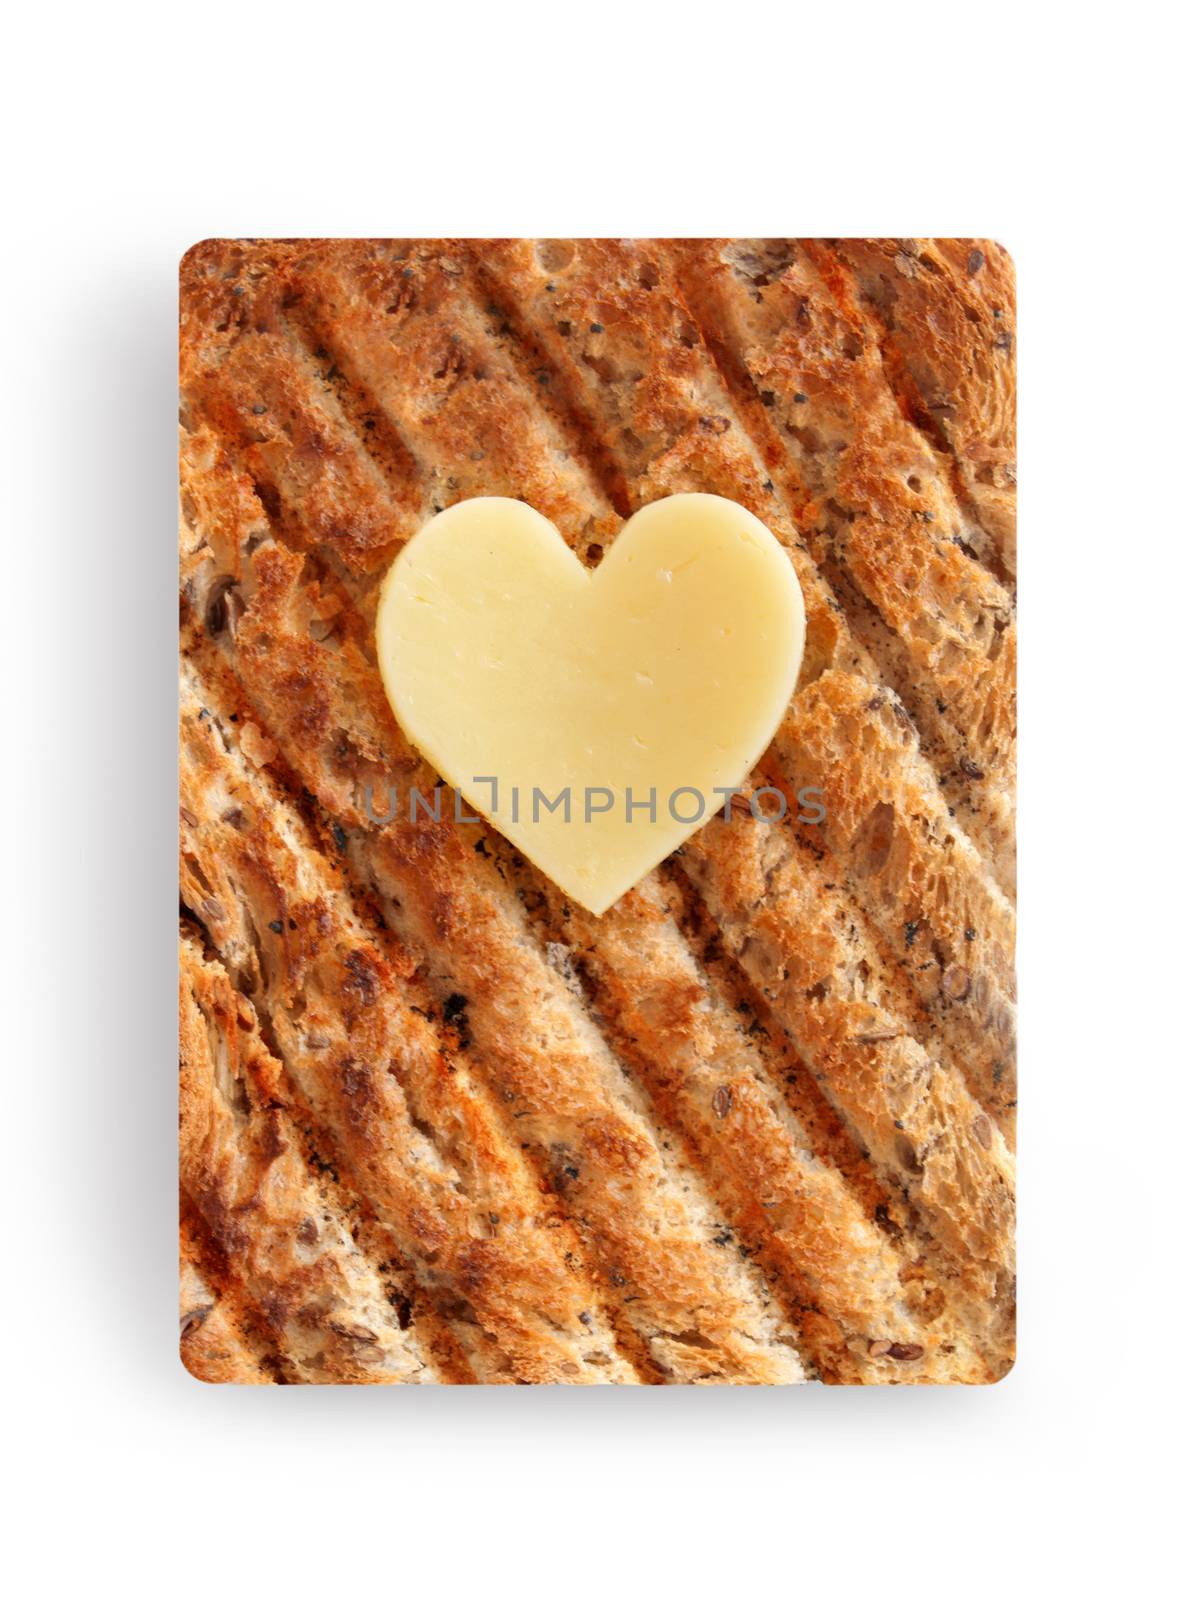 Heart shape slice of cheese on toasted whole grain bread over a white background